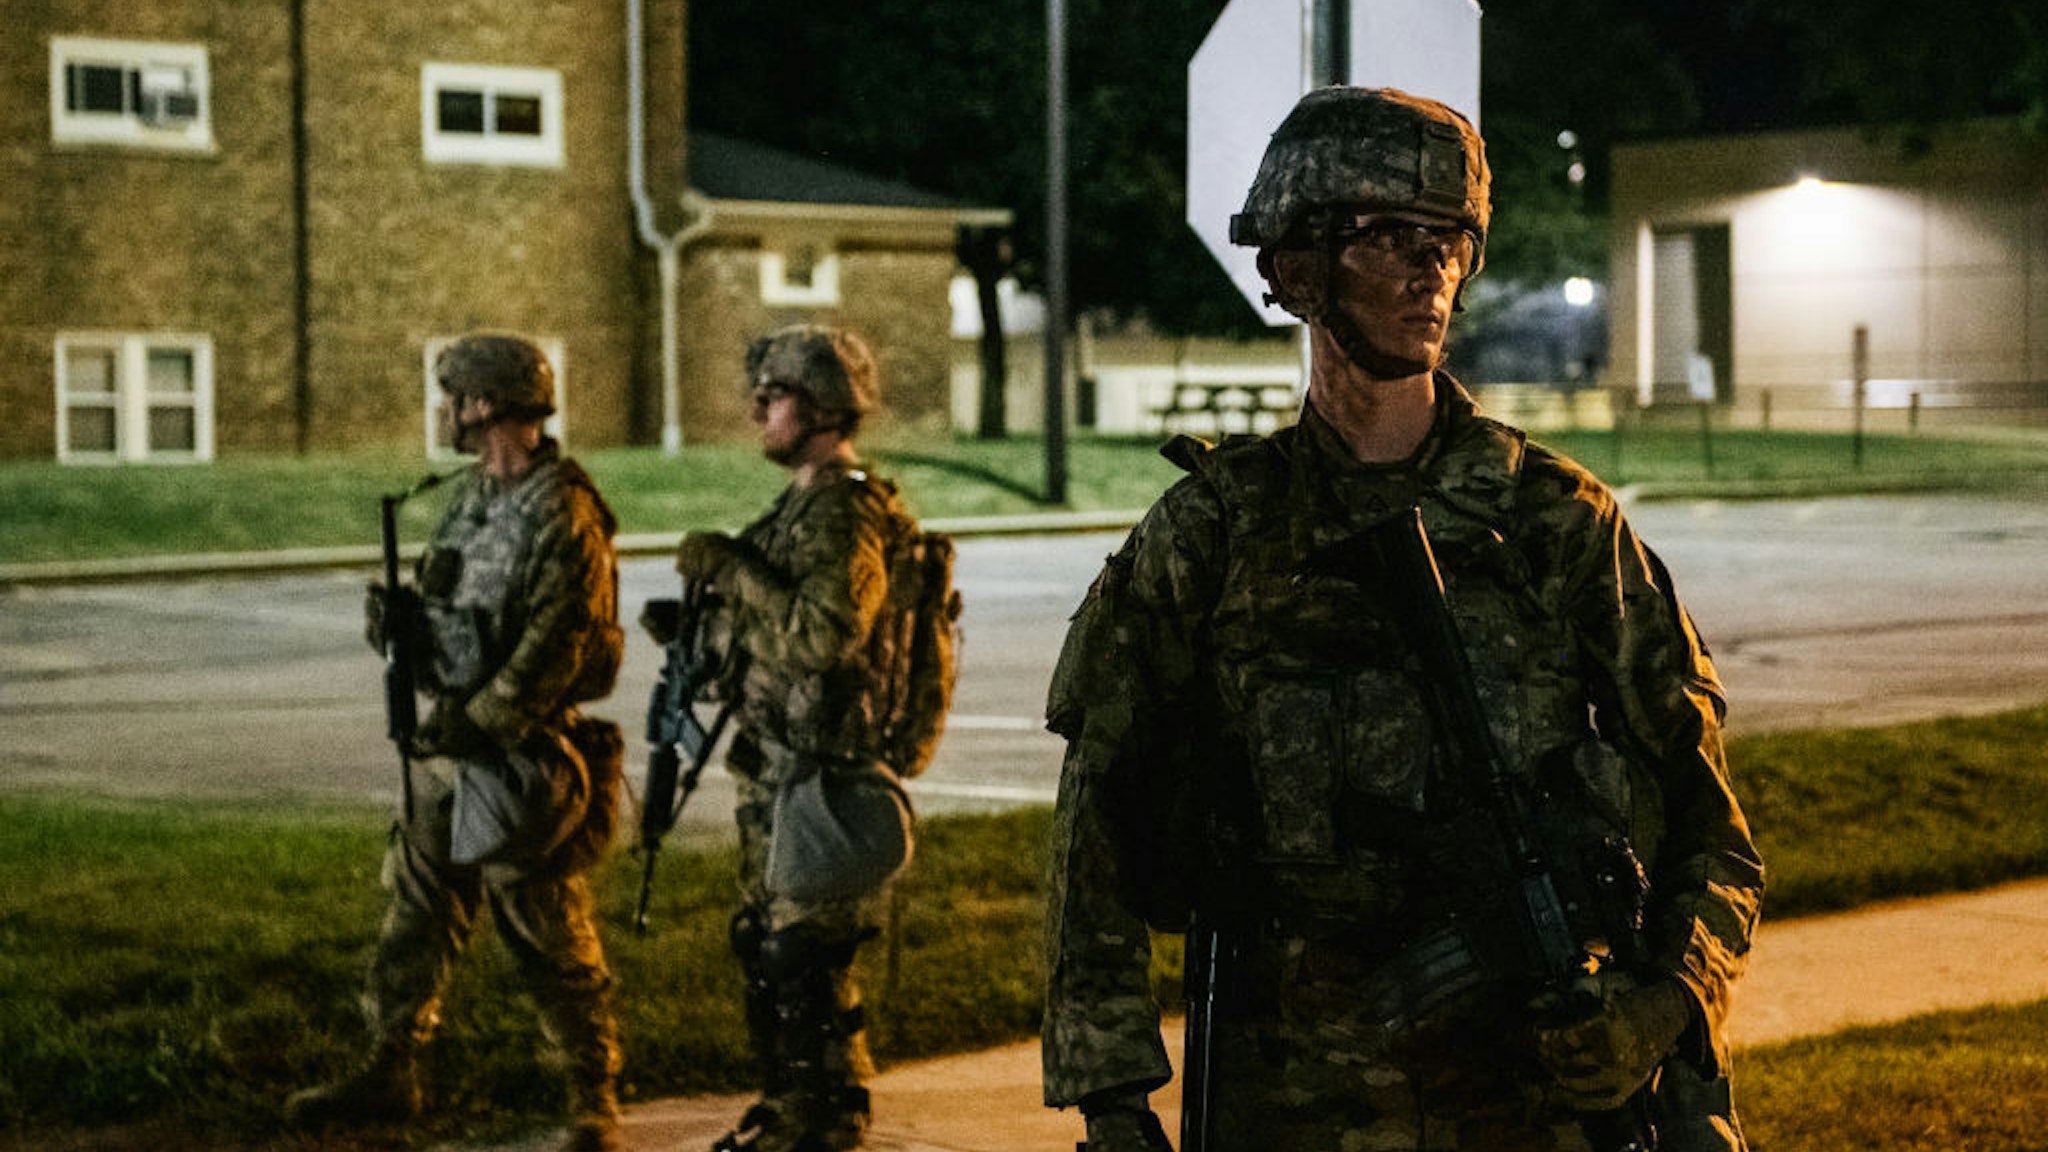 KENOSHA, WI - AUGUST 27: National Guard troops stand guard inside of a fenced area that surrounds several government buildings on August 27, 2020 in Kenosha, Wisconsin. Wisconsin Gov. Tony Evers approved a request for an additional 500 National Guard troops to be deployed into Wisconsin on August 26. Many arrests have been made with the additional presence of law enforcement. Civil unrest has occurred in multiple states after the shooting of Jacob Blake, 29, on August 23. Blake was shot multiple times in the back by Wisconsin police officers after attempting to enter into the drivers side of a vehicle. (Photo by Brandon Bell/Getty Images)